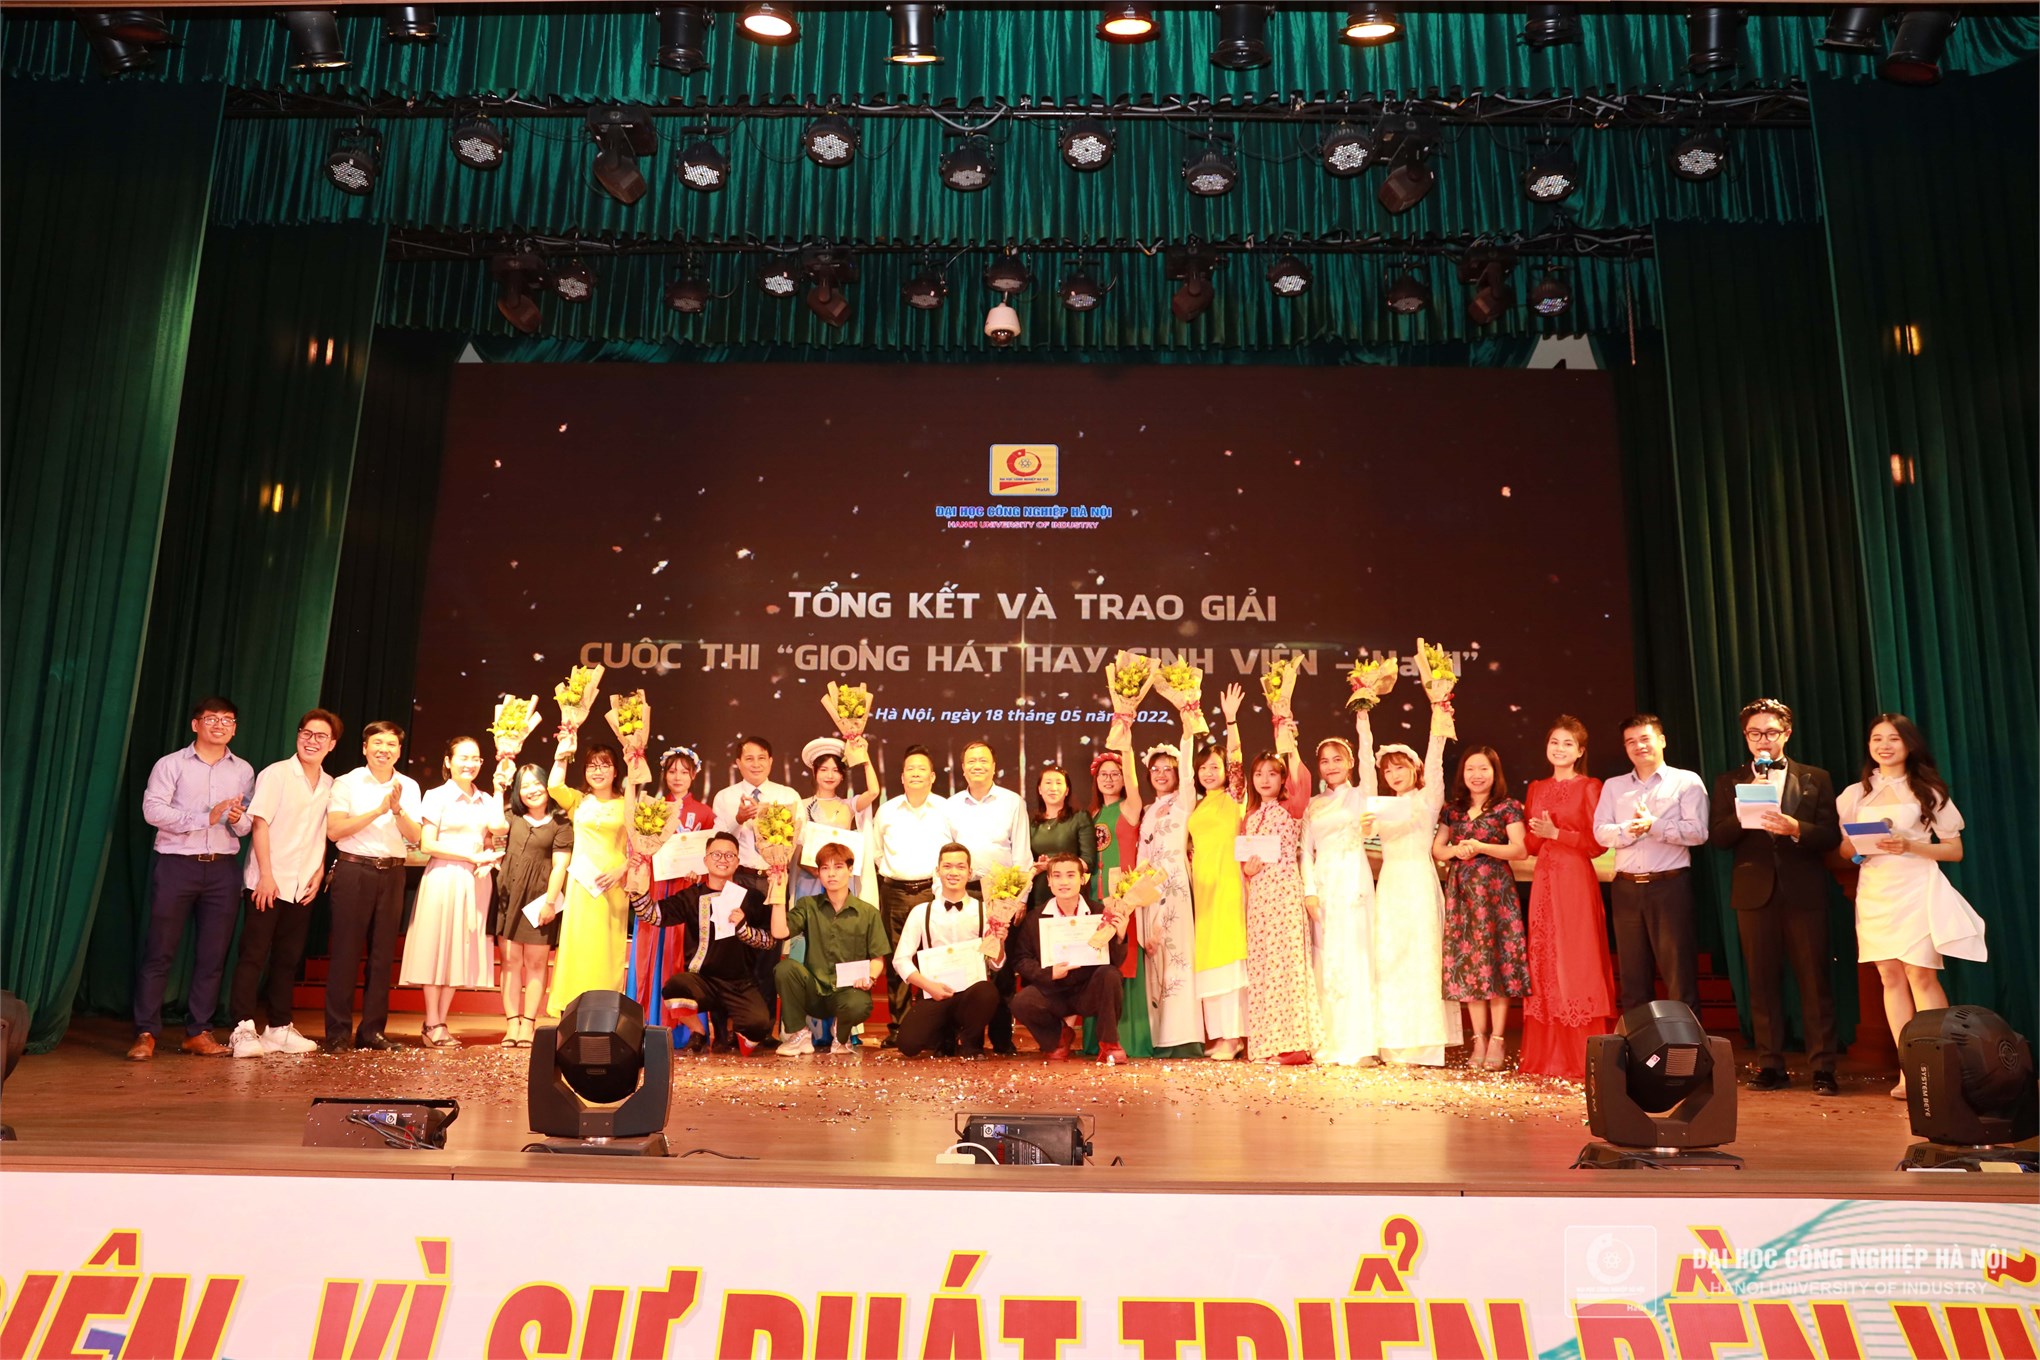 Impressions from the 2021 HaUI Student Singing Contest final night